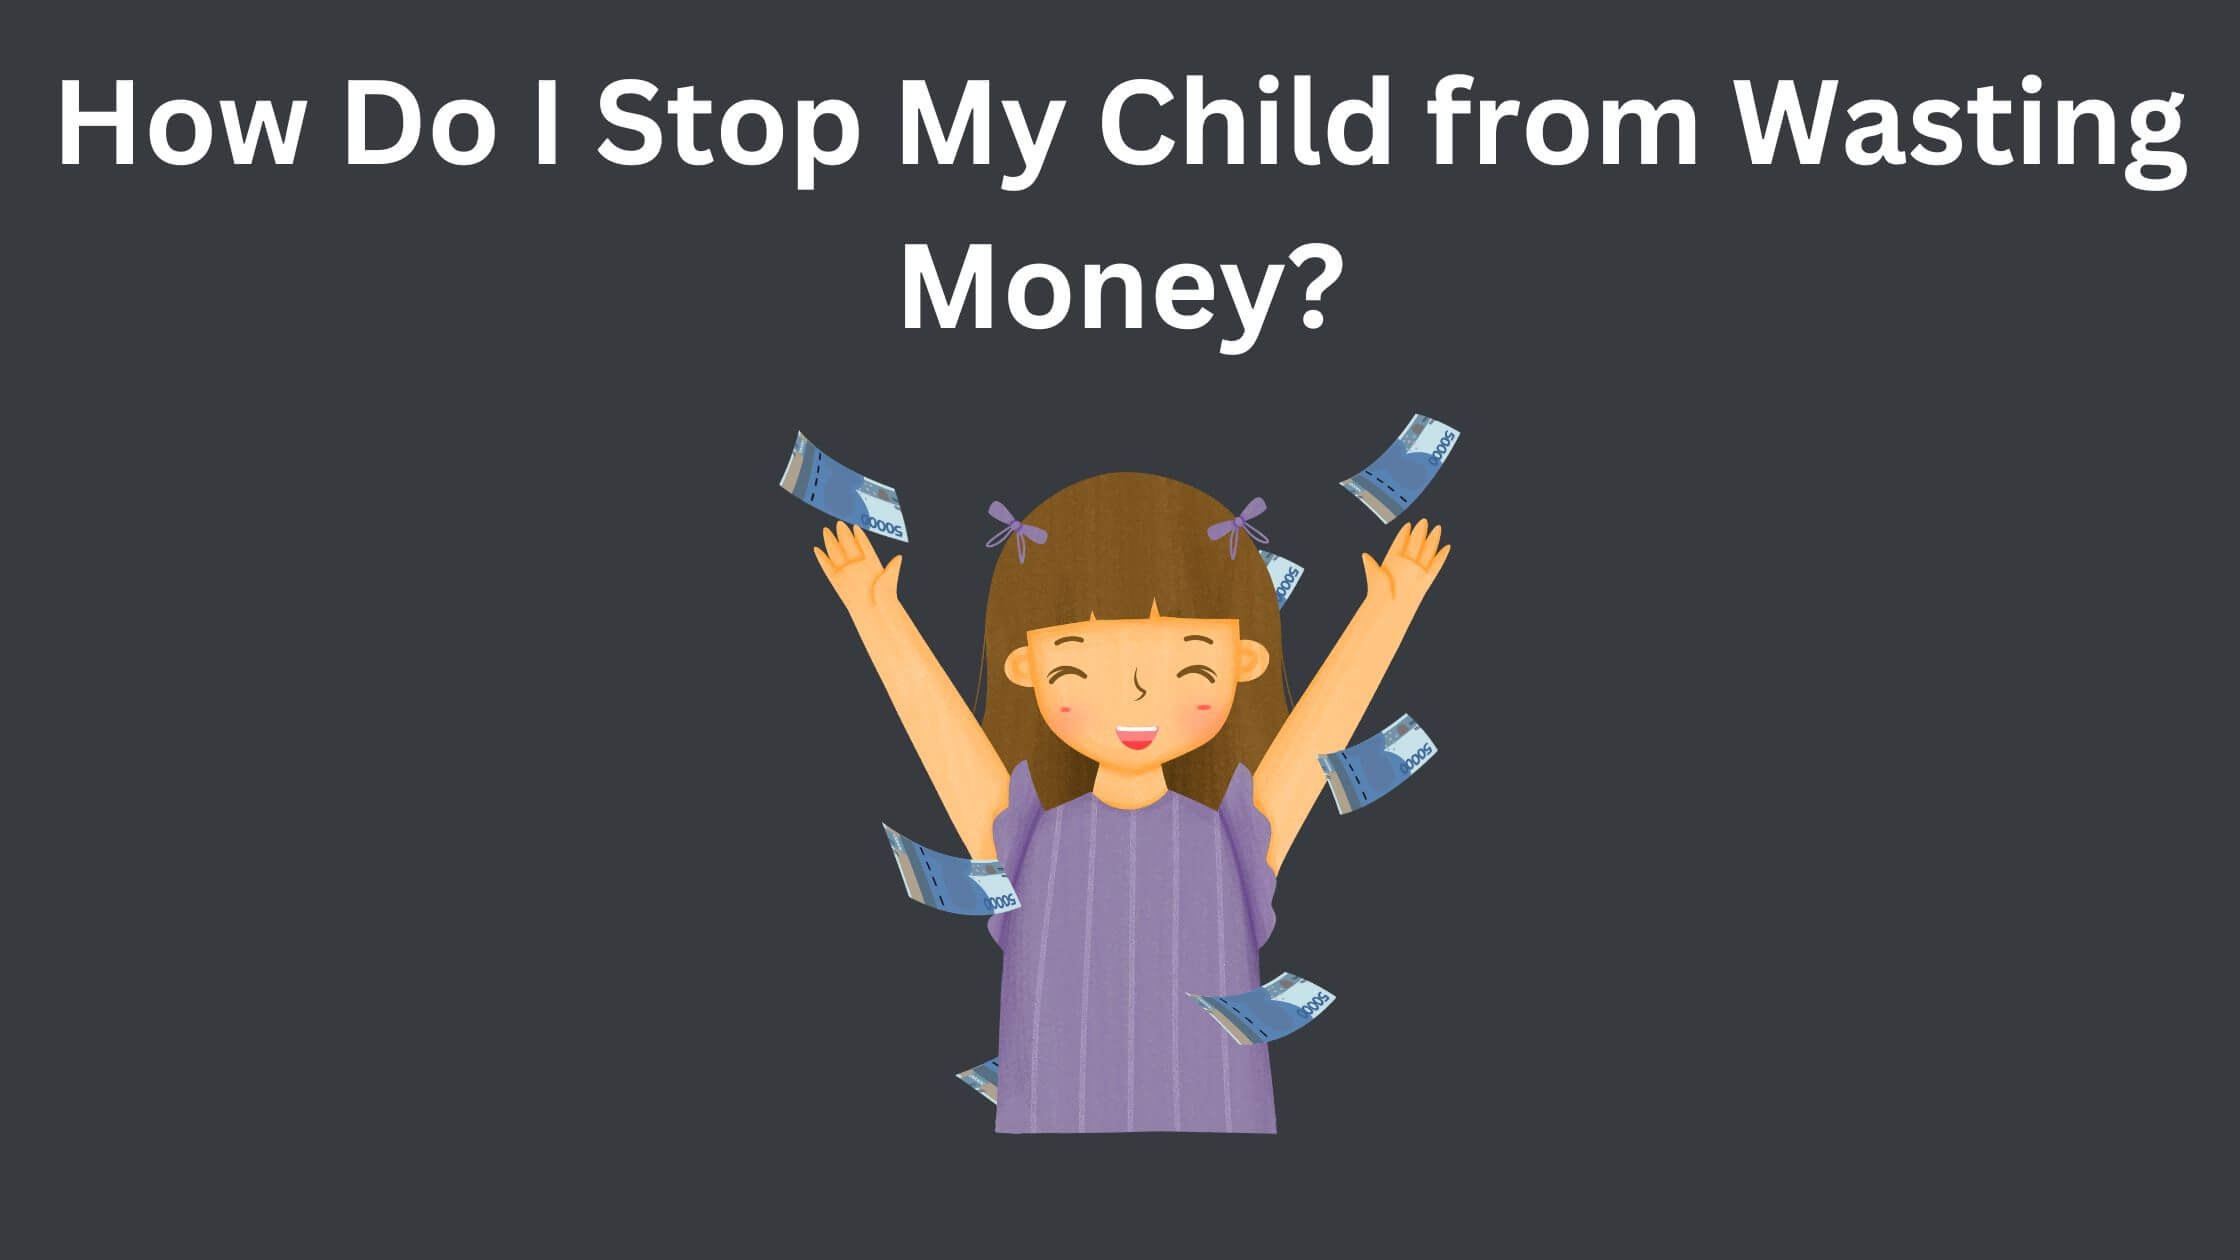 How do I stop my child from wasting money?